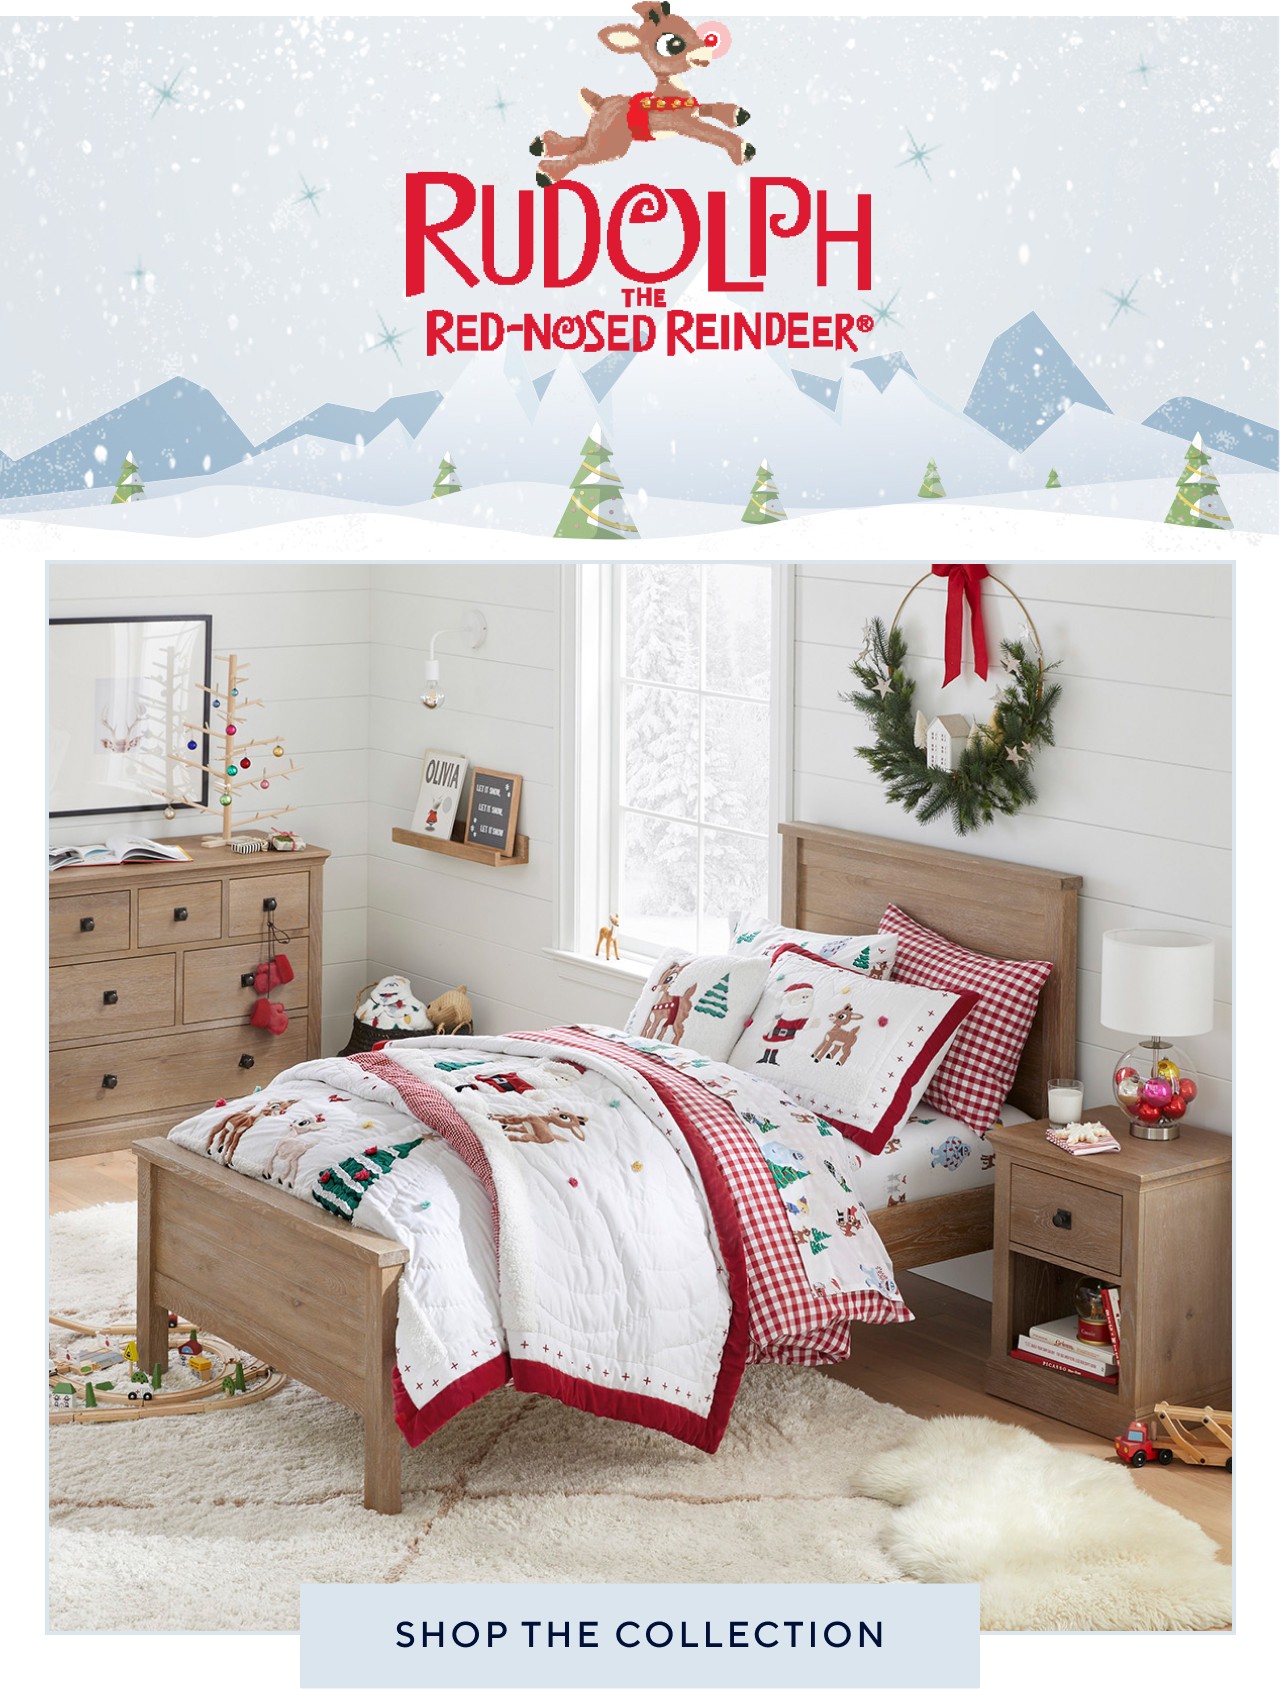 RUDOLPH THE RED-NOSED REINDEER - SHOP THE COLLECTION